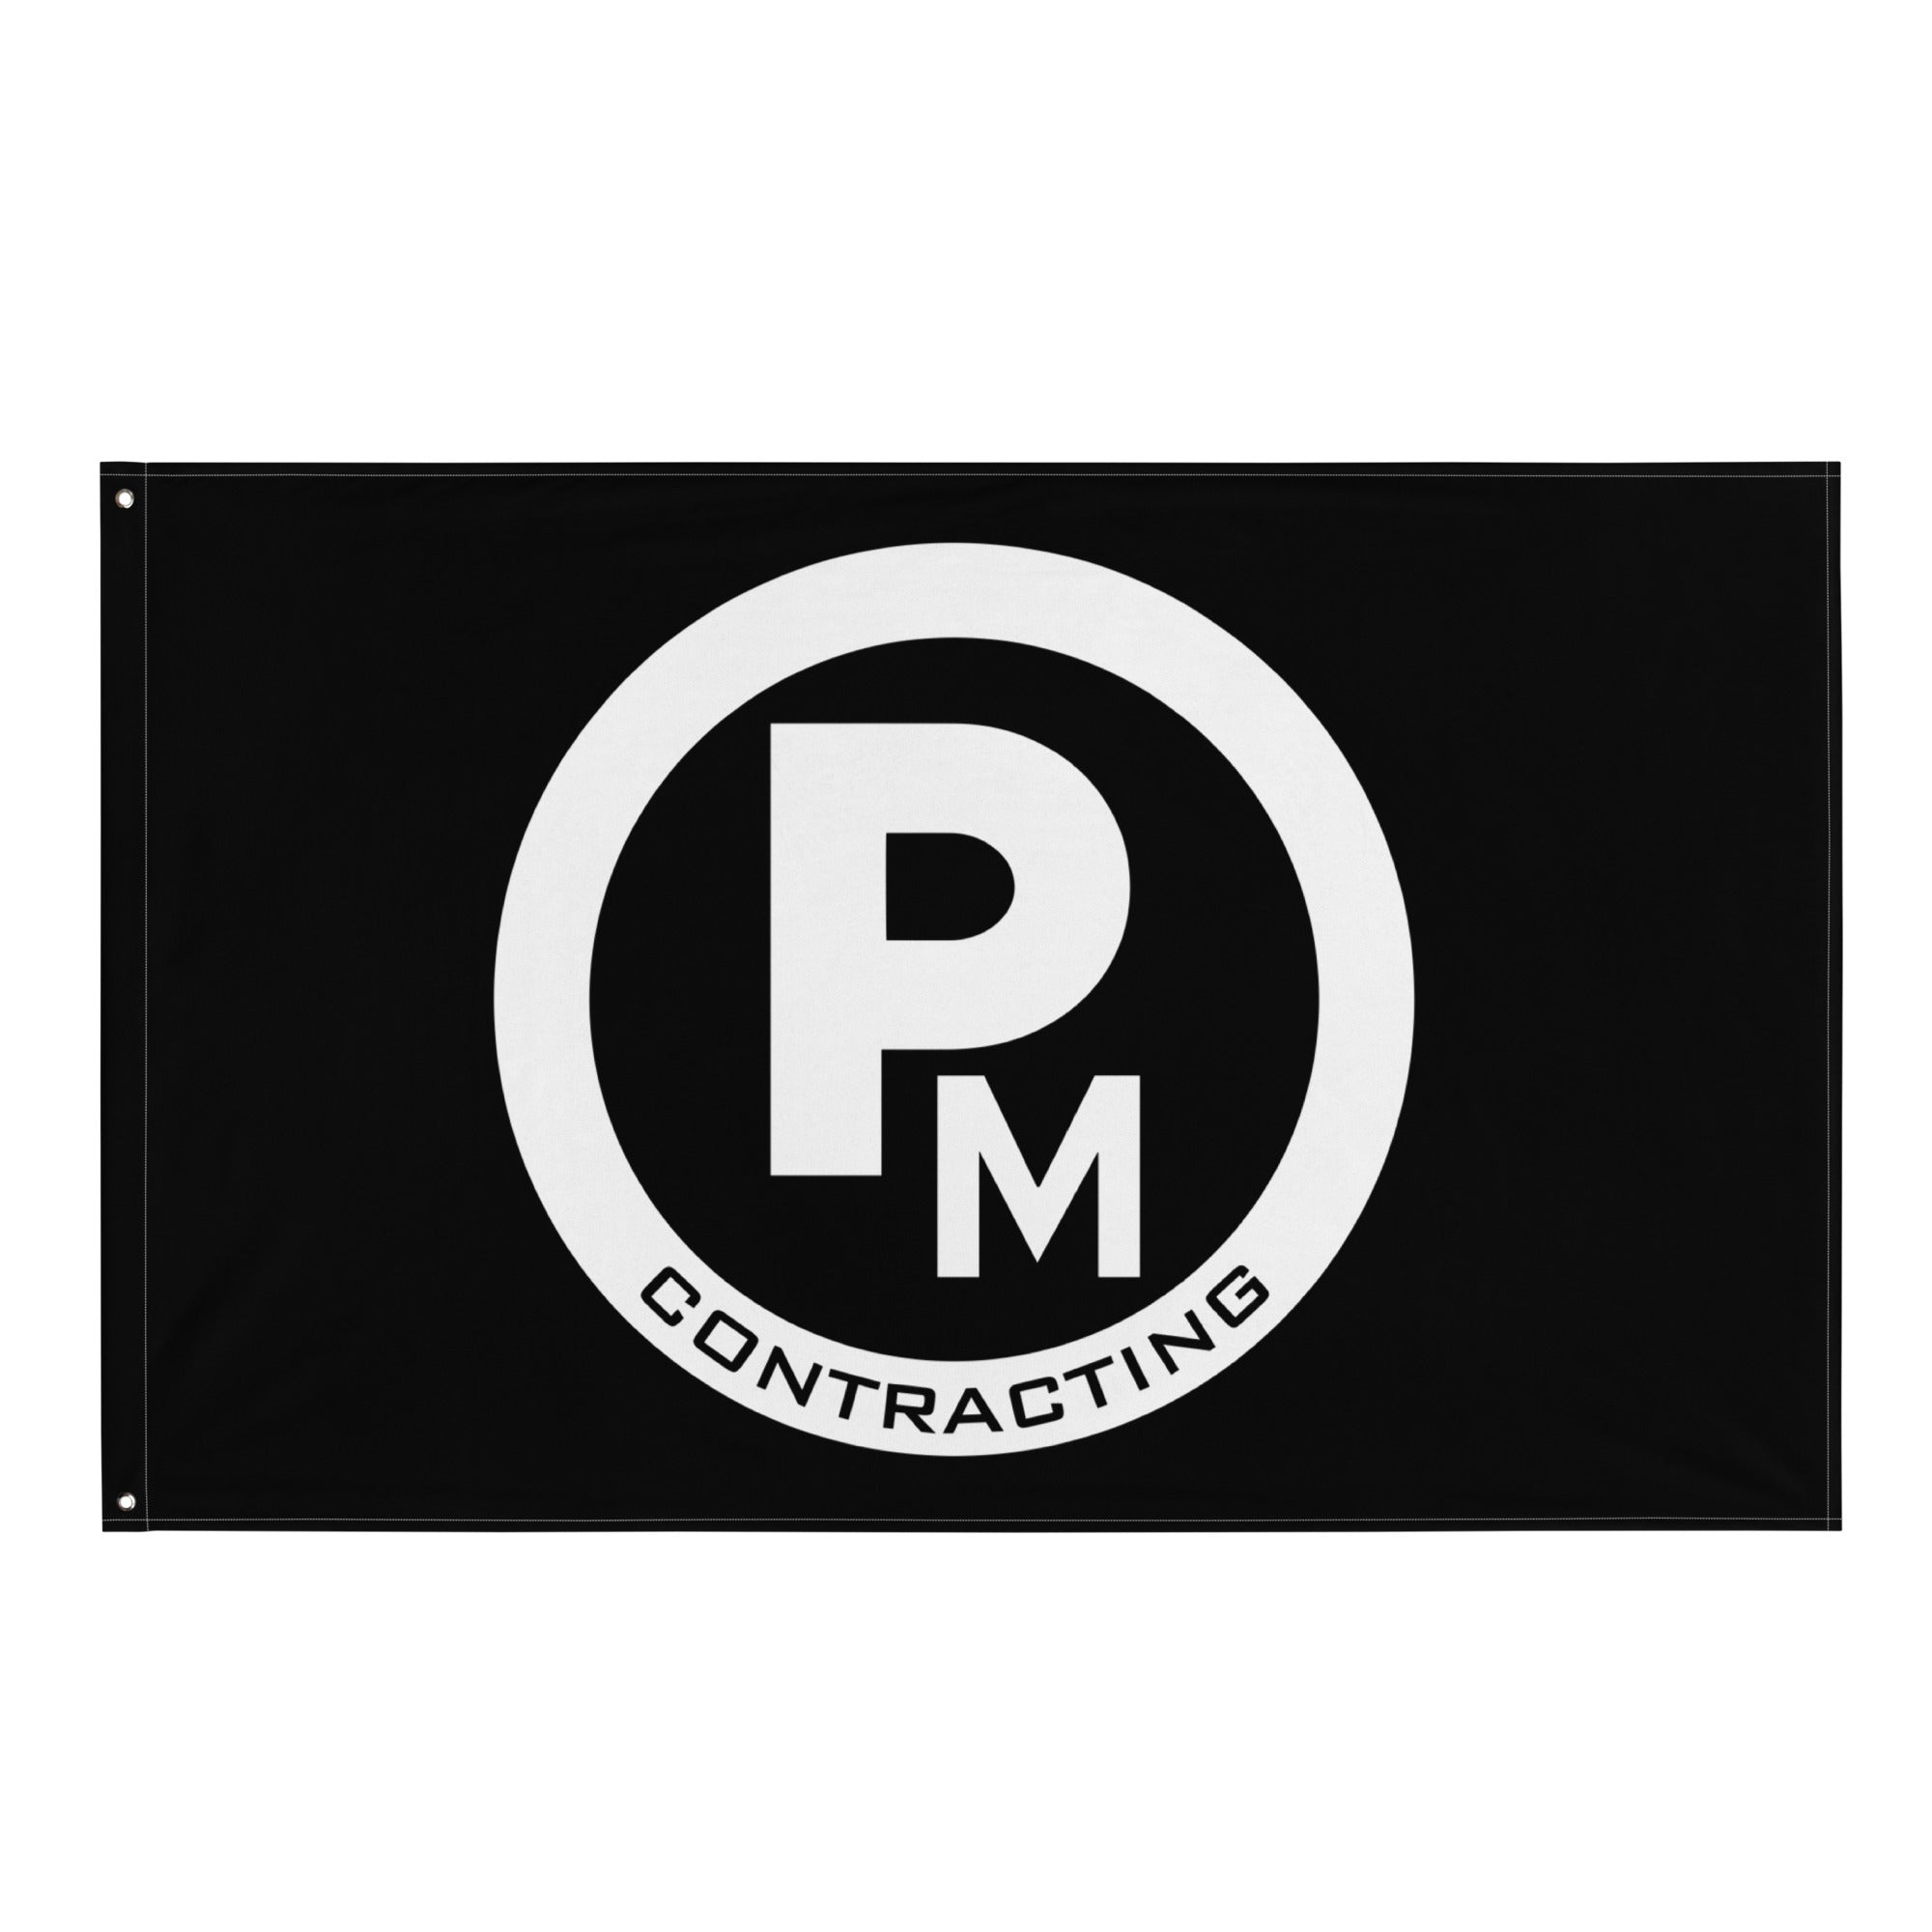 PM Contracting All-Over Print Flag